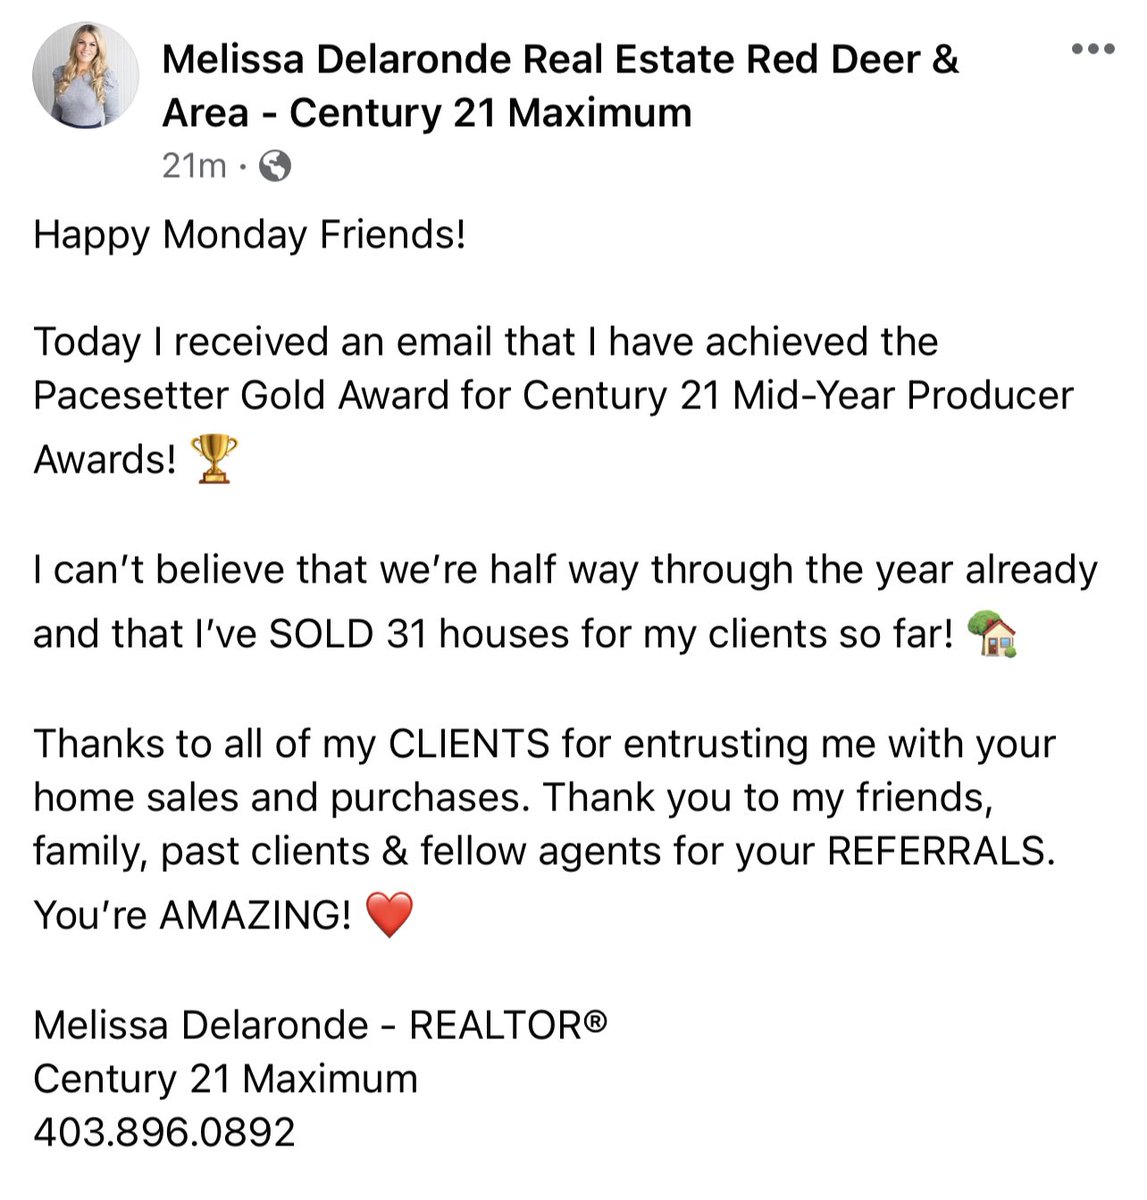 Happy Monday Friends!

Today I received an email that I have achieved the Pacesetter Gold Award for Century 21 Mid-Year Producer Awards! 🏆 

#pacesettergoldaward #midyearawards #grateful #realestate #realtorlife #century21maximum #meldelsells